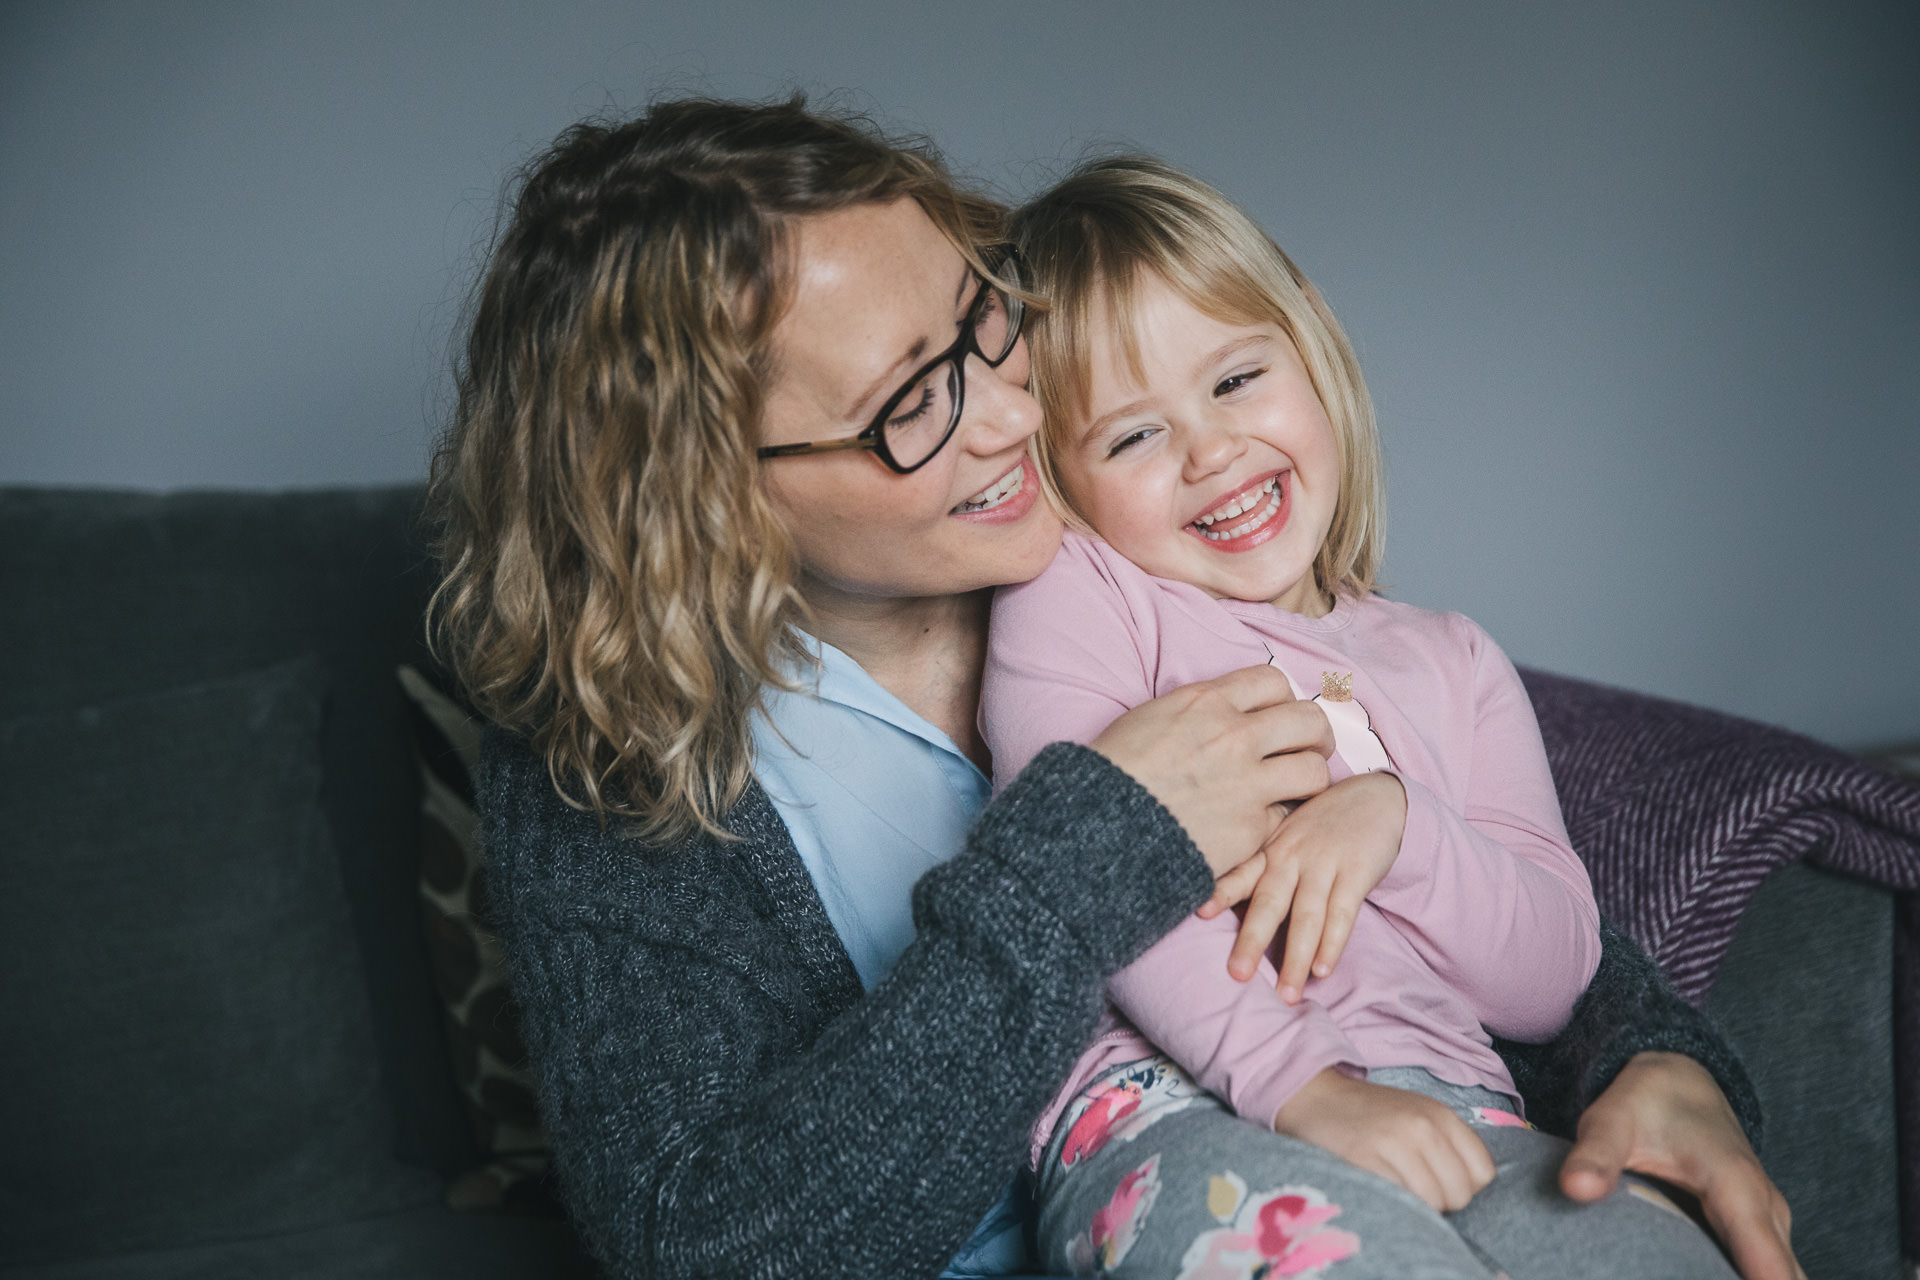 Relaxed family photo of a mother and daughter laughing together